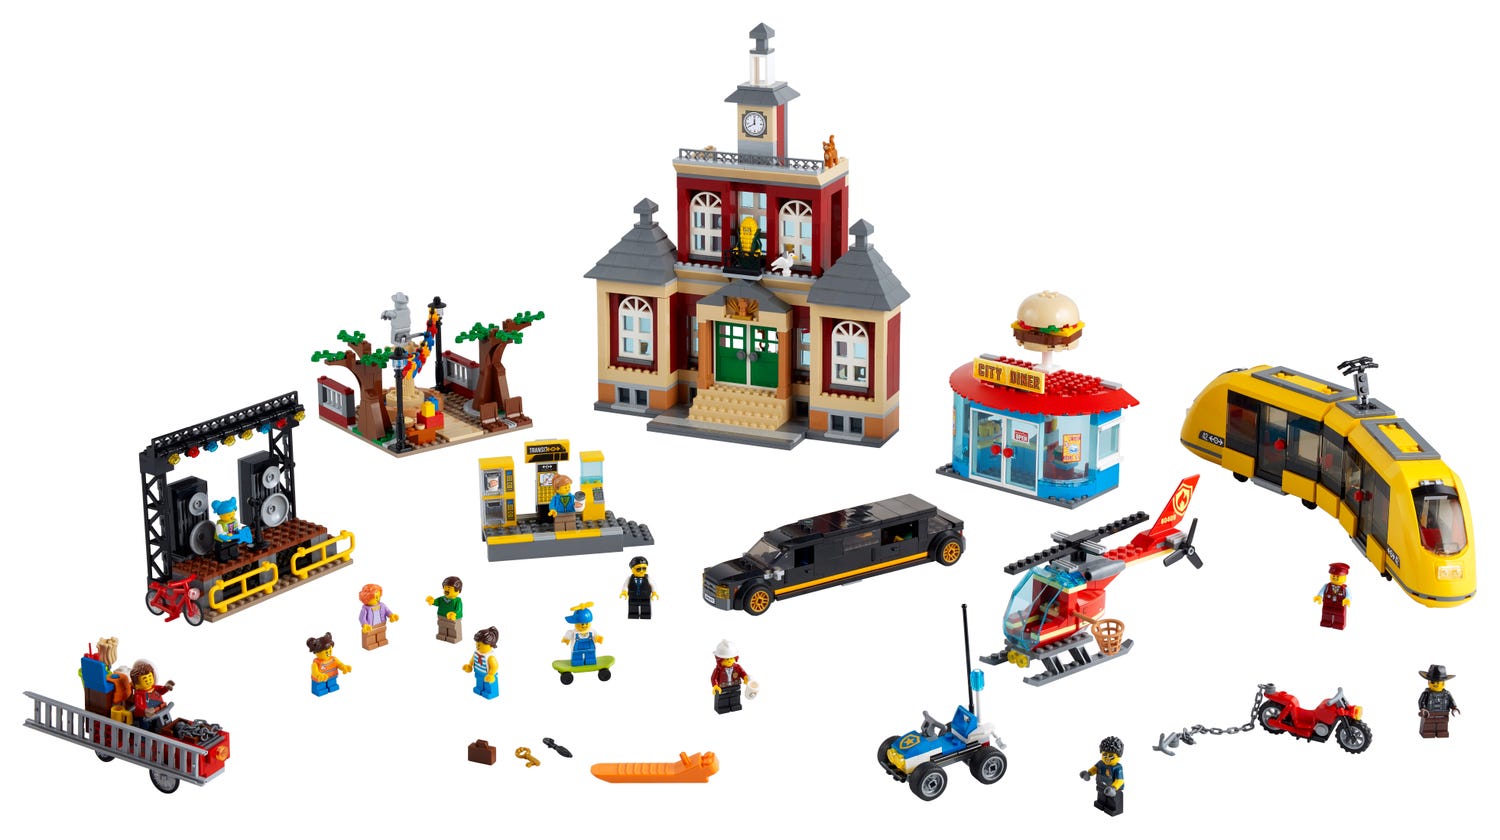 Main Square 60271 | City | Buy Online At The Official Lego® Shop Us